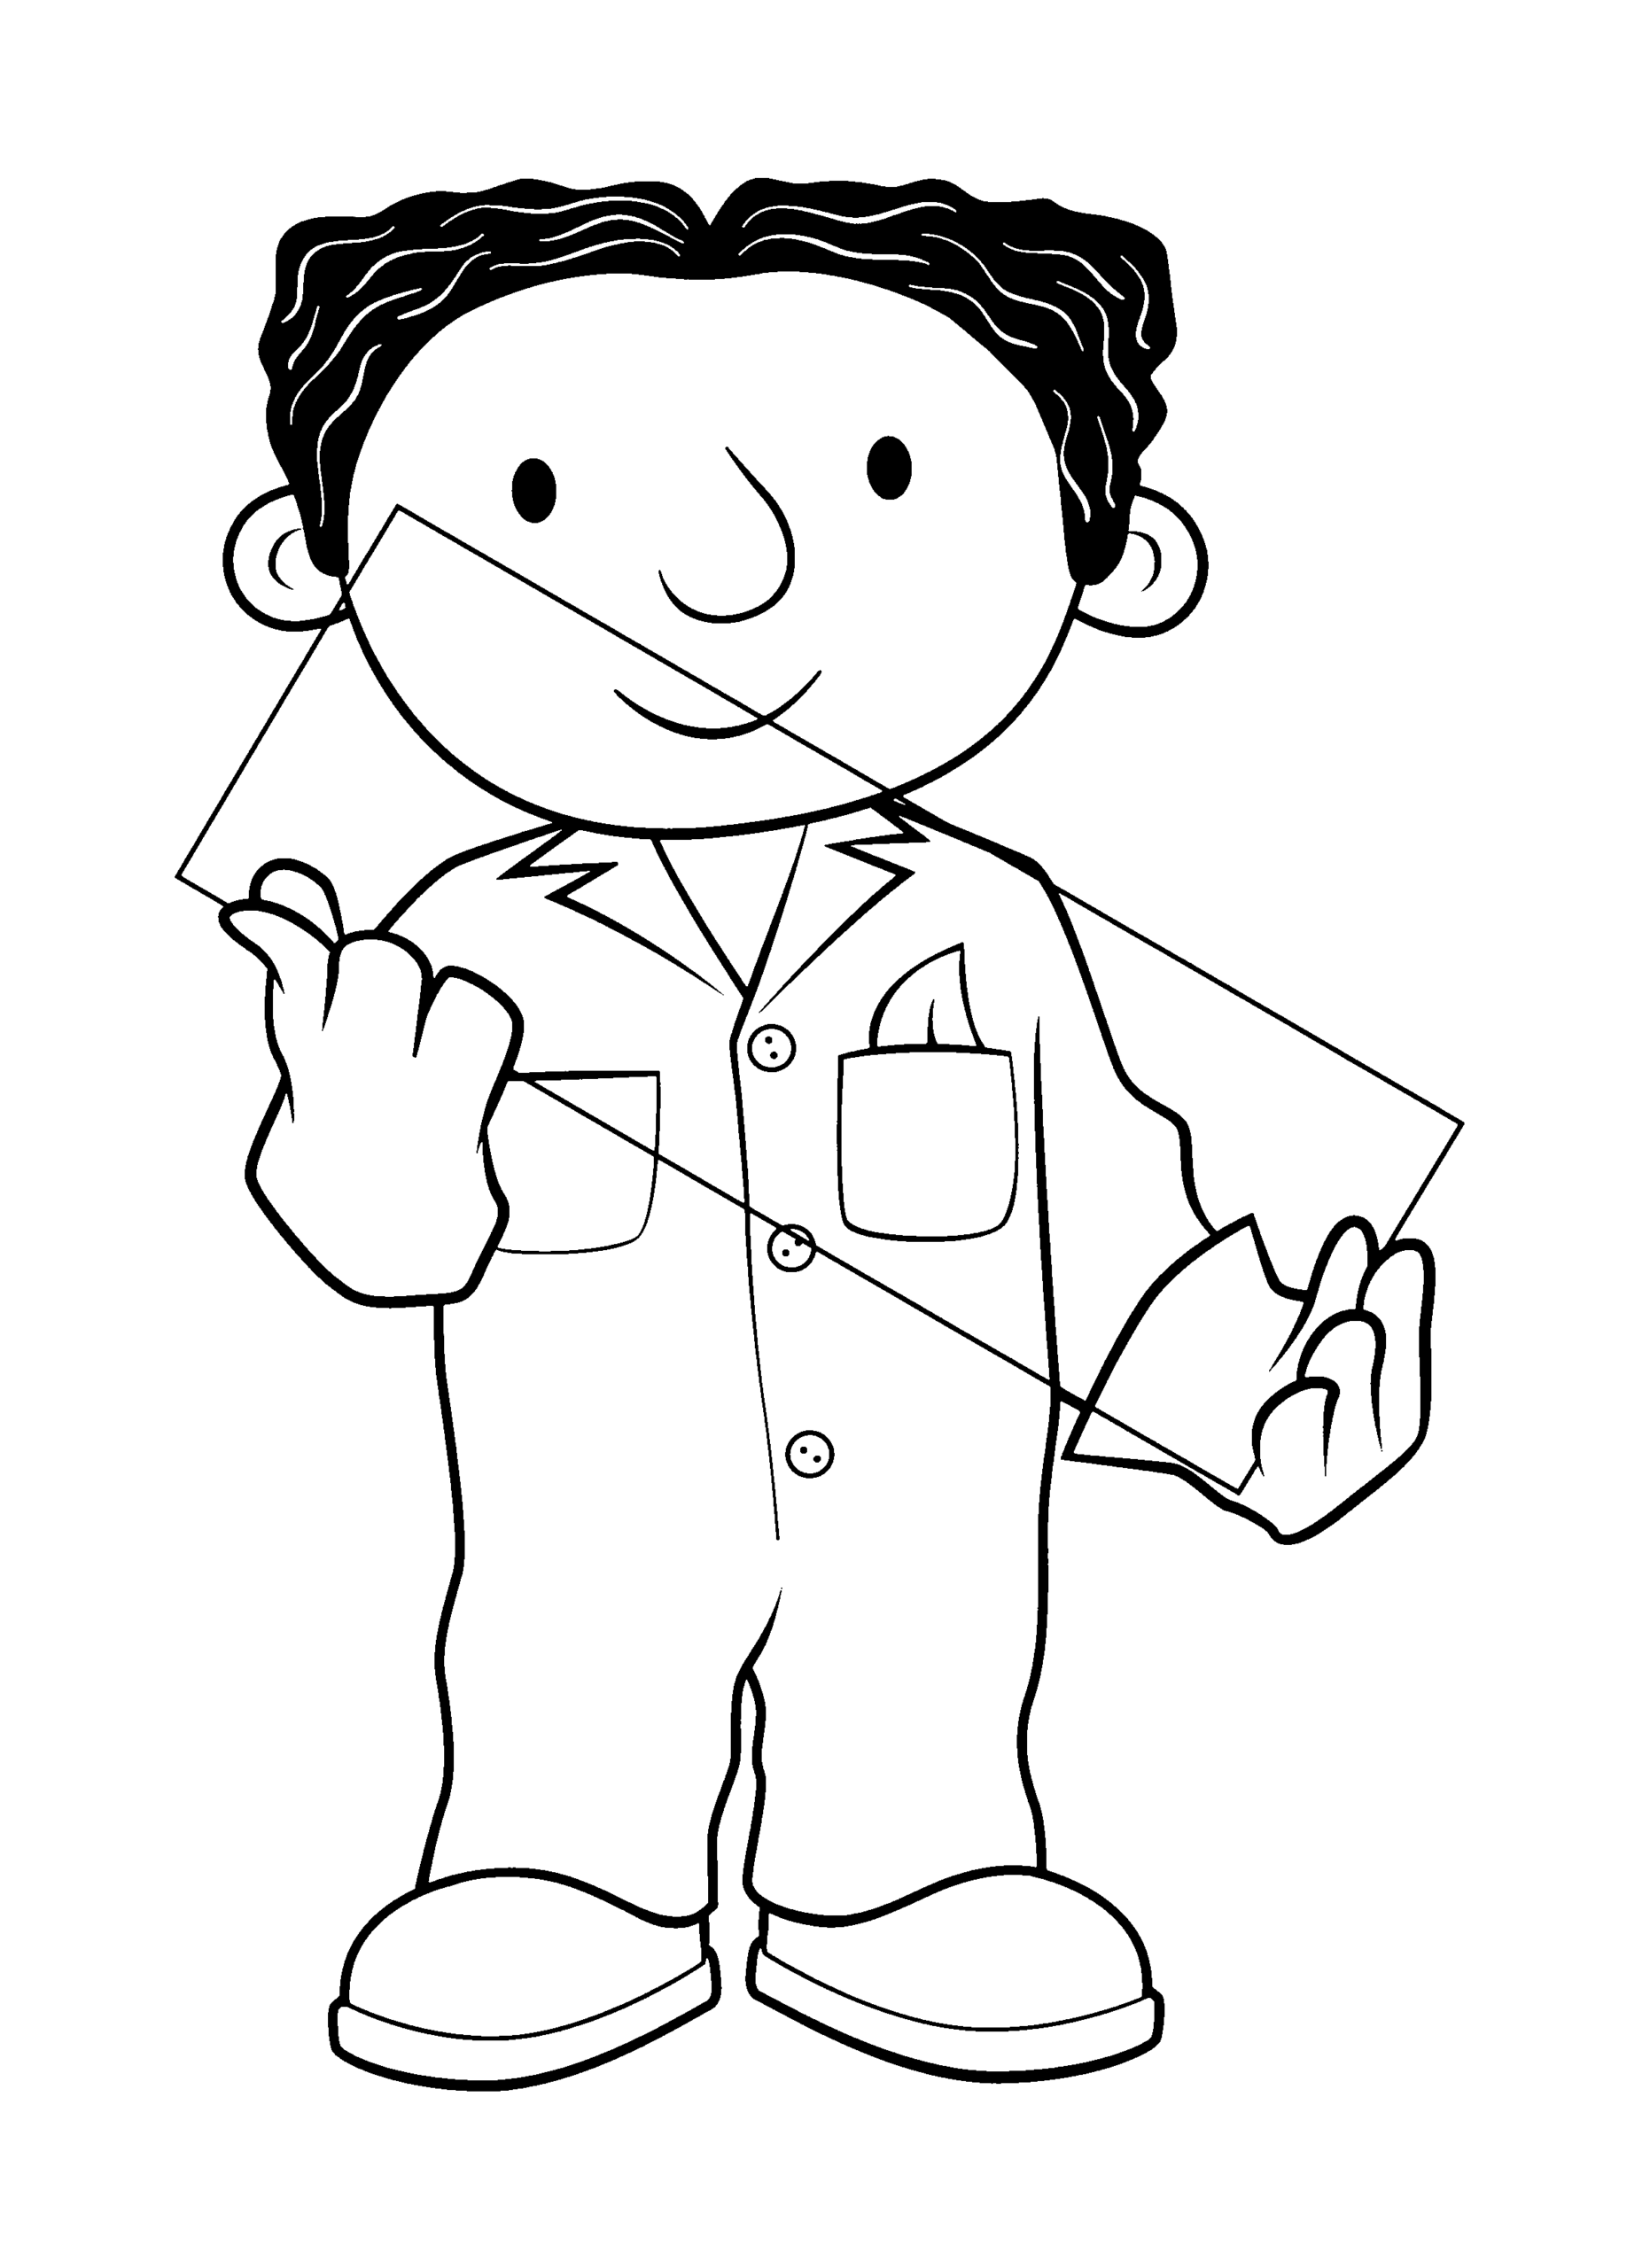 Bob the Builder Coloring Pages TV Film bob the builder 26 Printable 2020 01044 Coloring4free